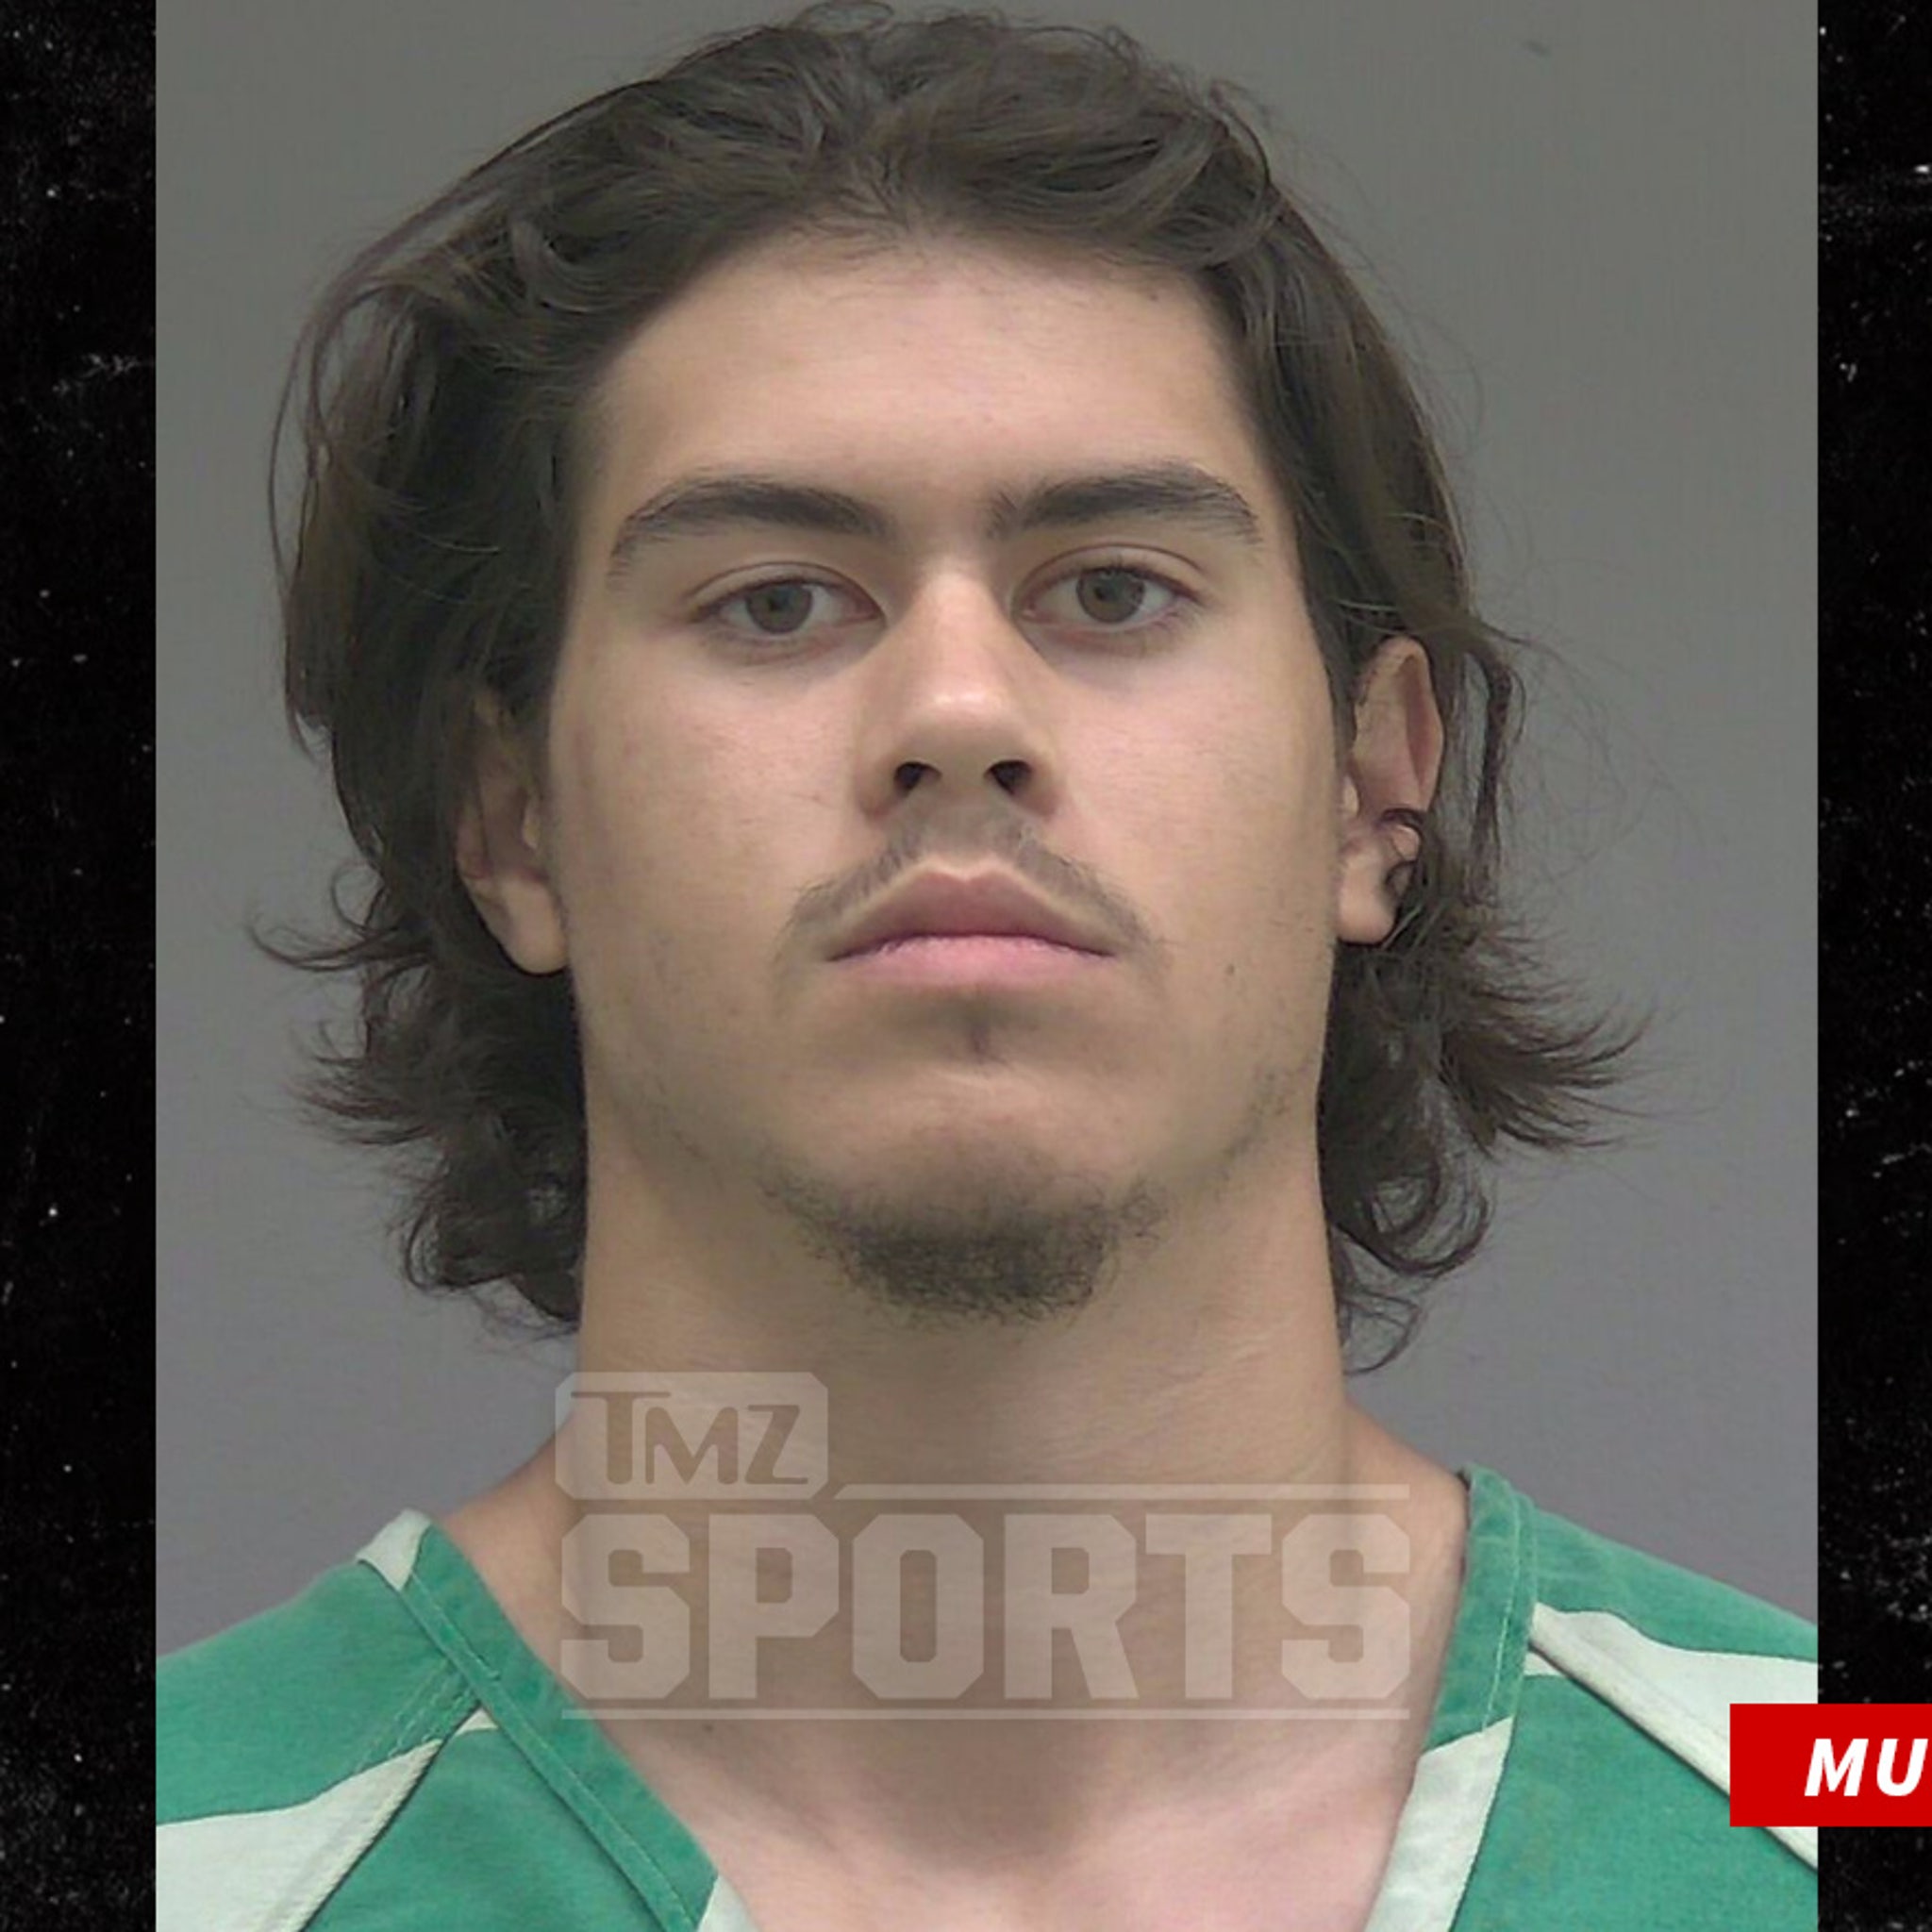 UF QB Jalen Kitna Shared Image Of Adult Male Having Sex With Child, Cops Say